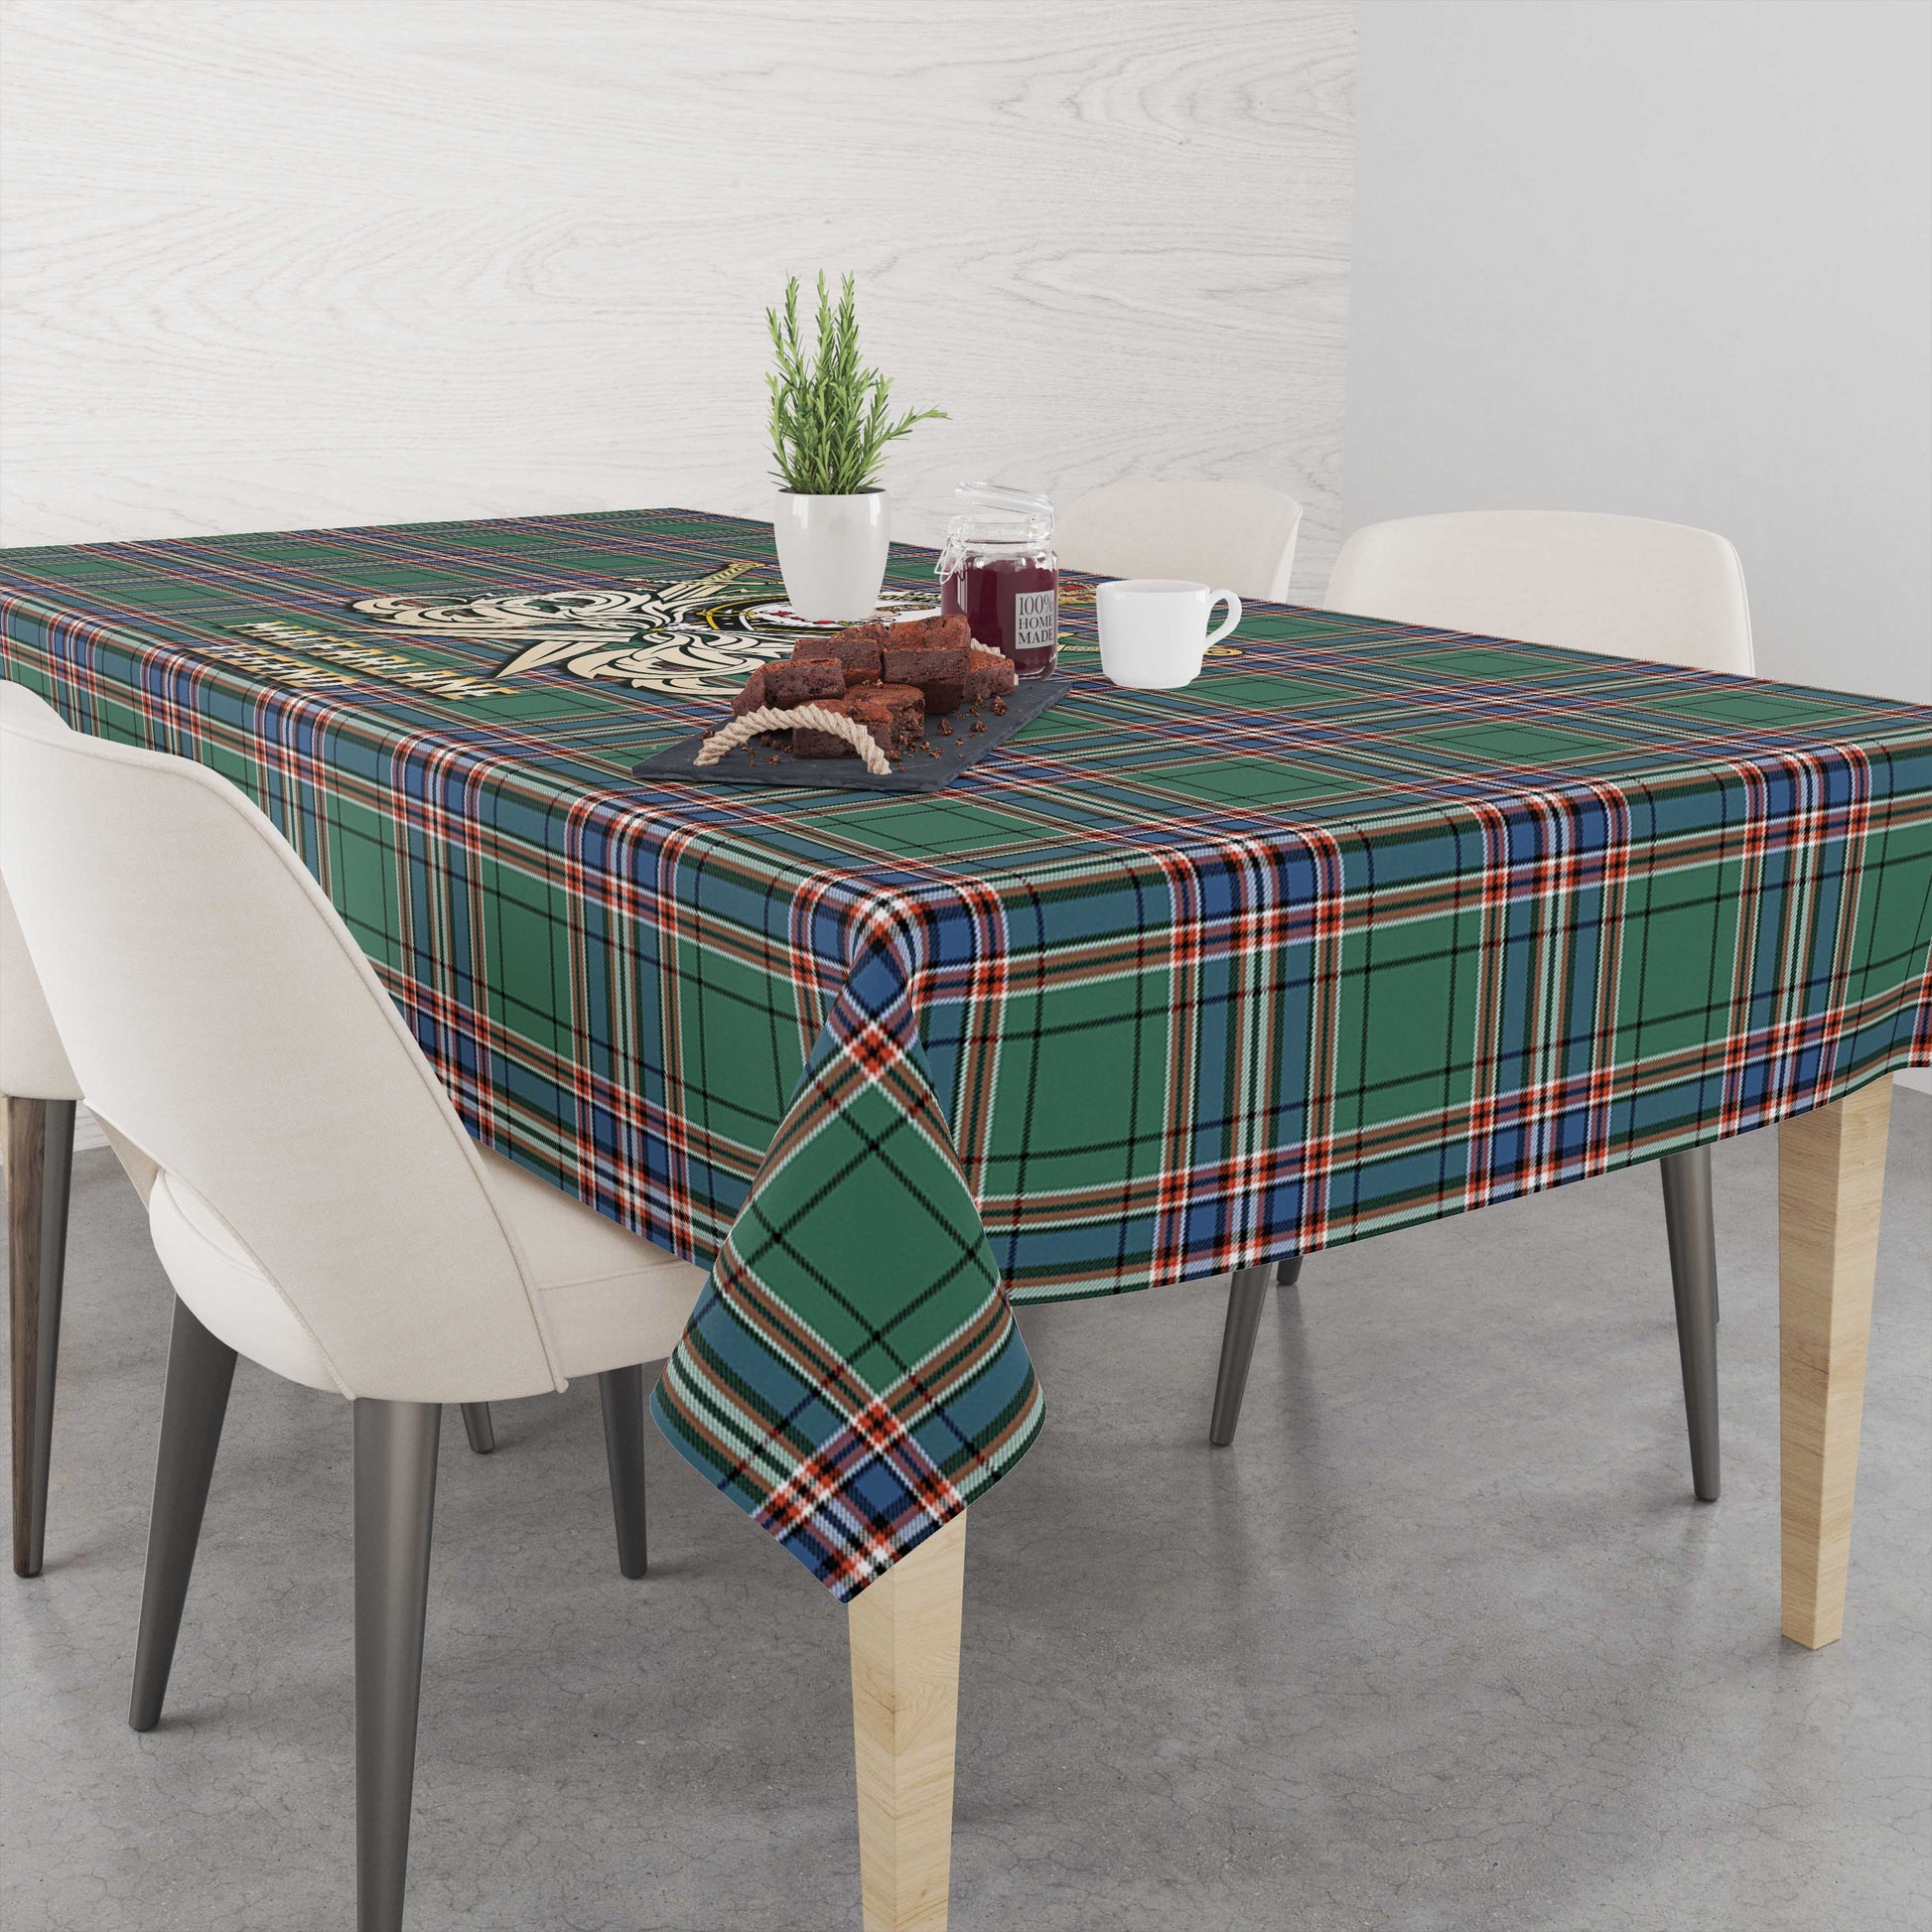 Tartan Vibes Clothing MacFarlane Hunting Ancient Tartan Tablecloth with Clan Crest and the Golden Sword of Courageous Legacy